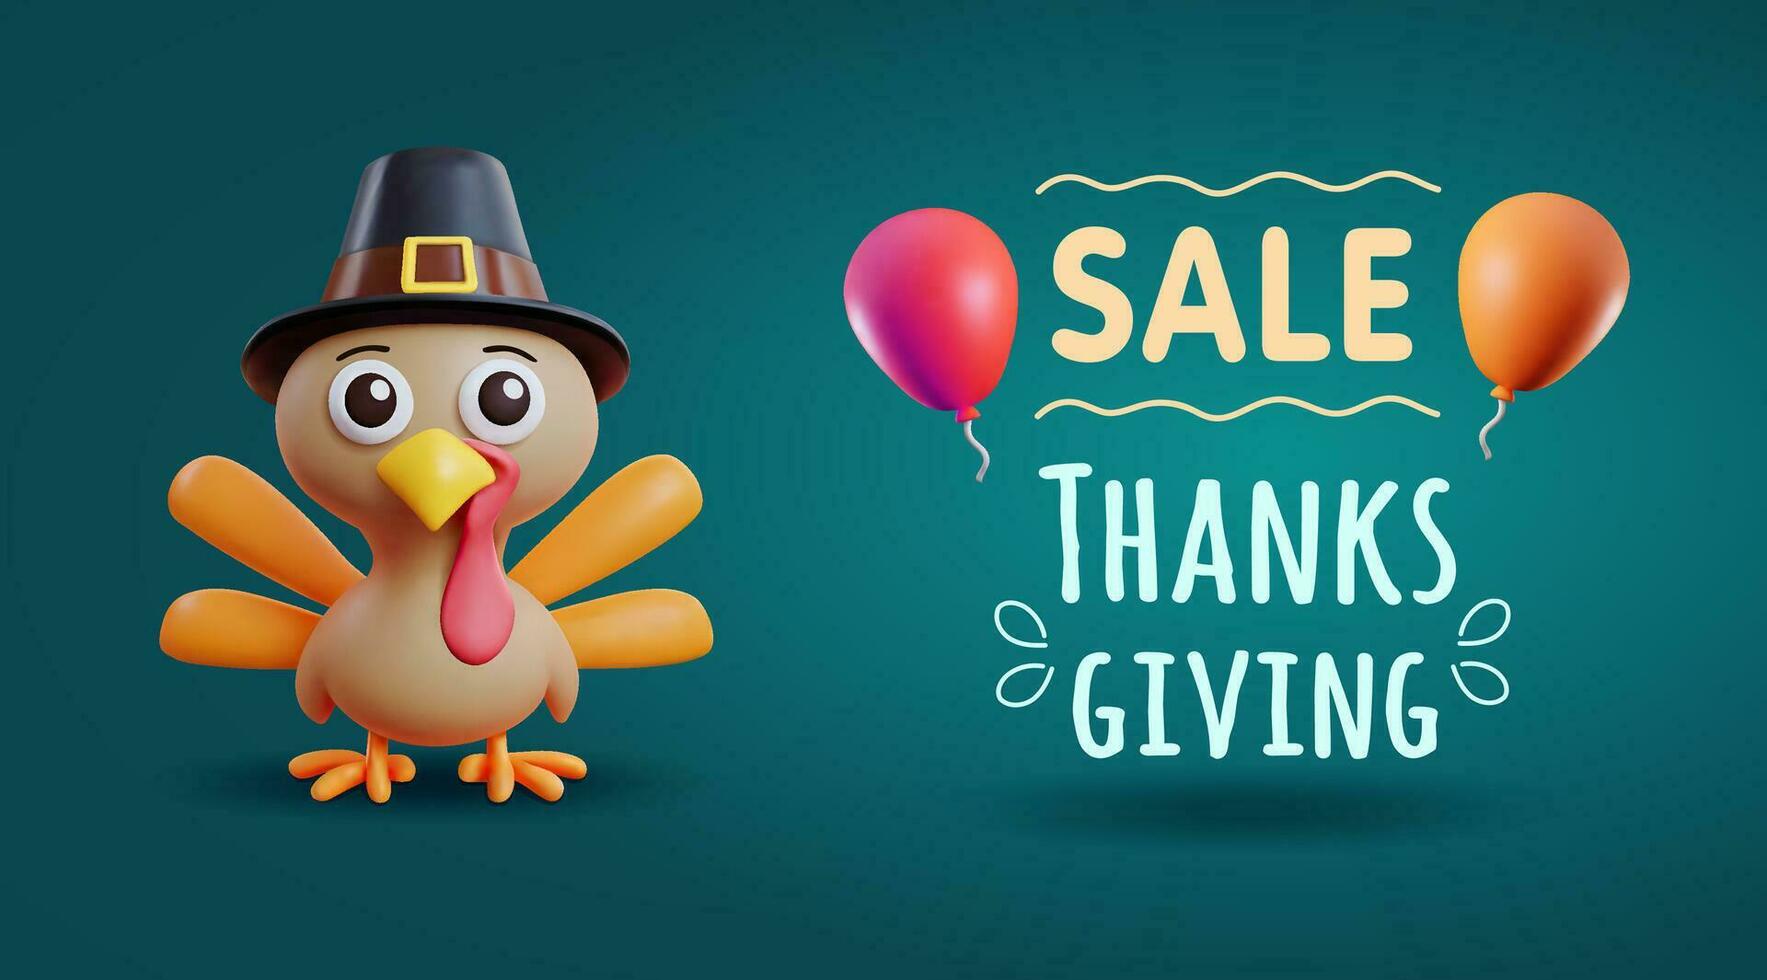 Thanksgiving sale banner with 3d cute turkey character in pilgrim hat and air balloons. 3d stylized vector illustration for sale event